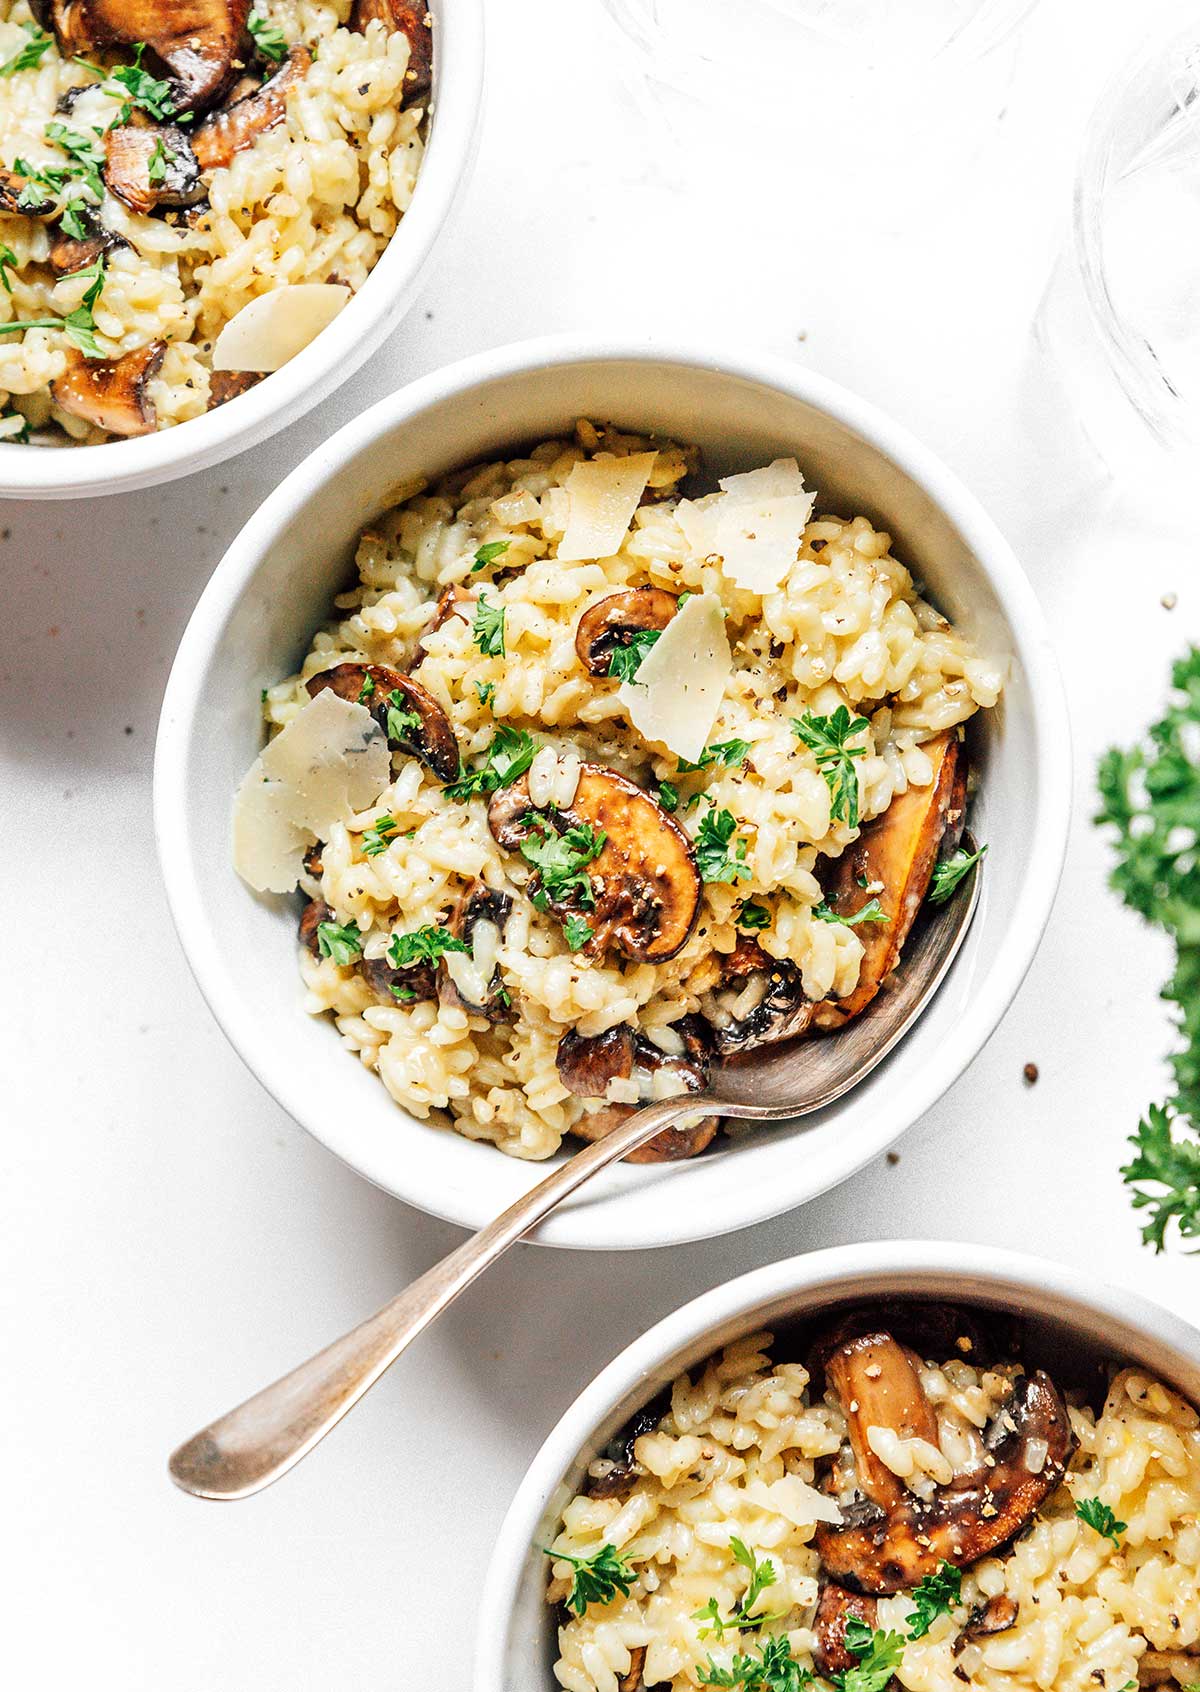 A white bowl filled with mushroom risotto and topped with parmesan flakes.